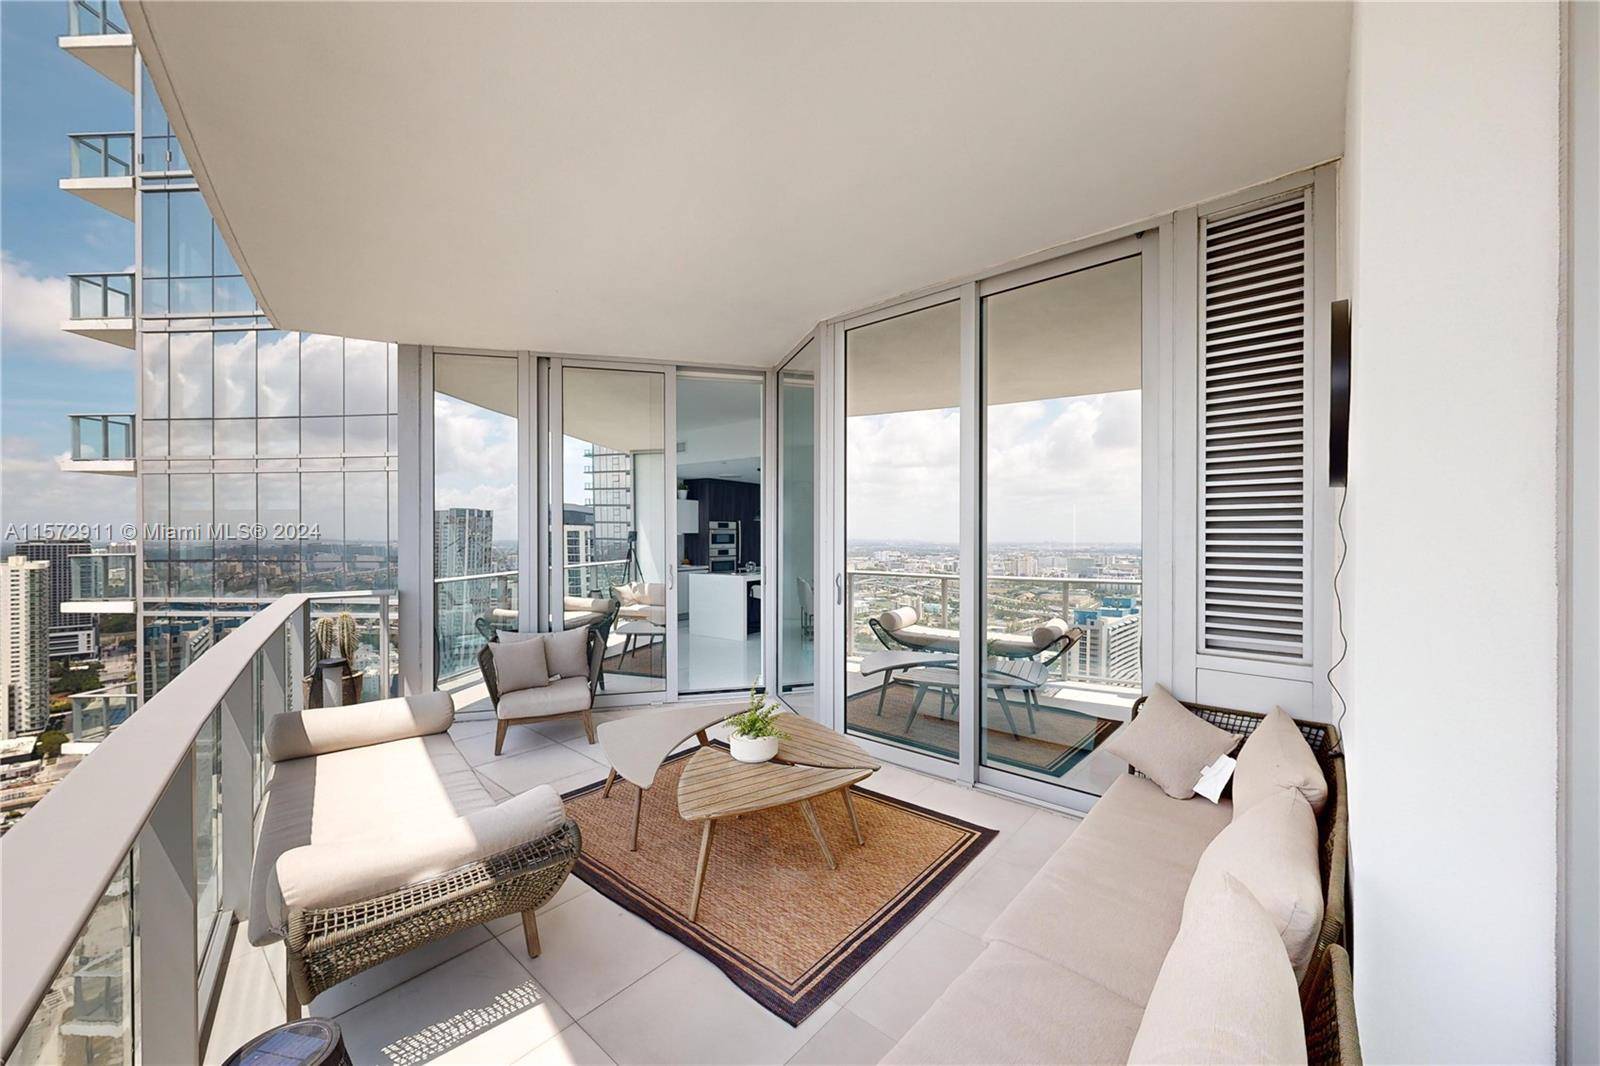 Discover unparalleled luxury living in the heart of Miami at this exquisite 1 bedroom, 1.